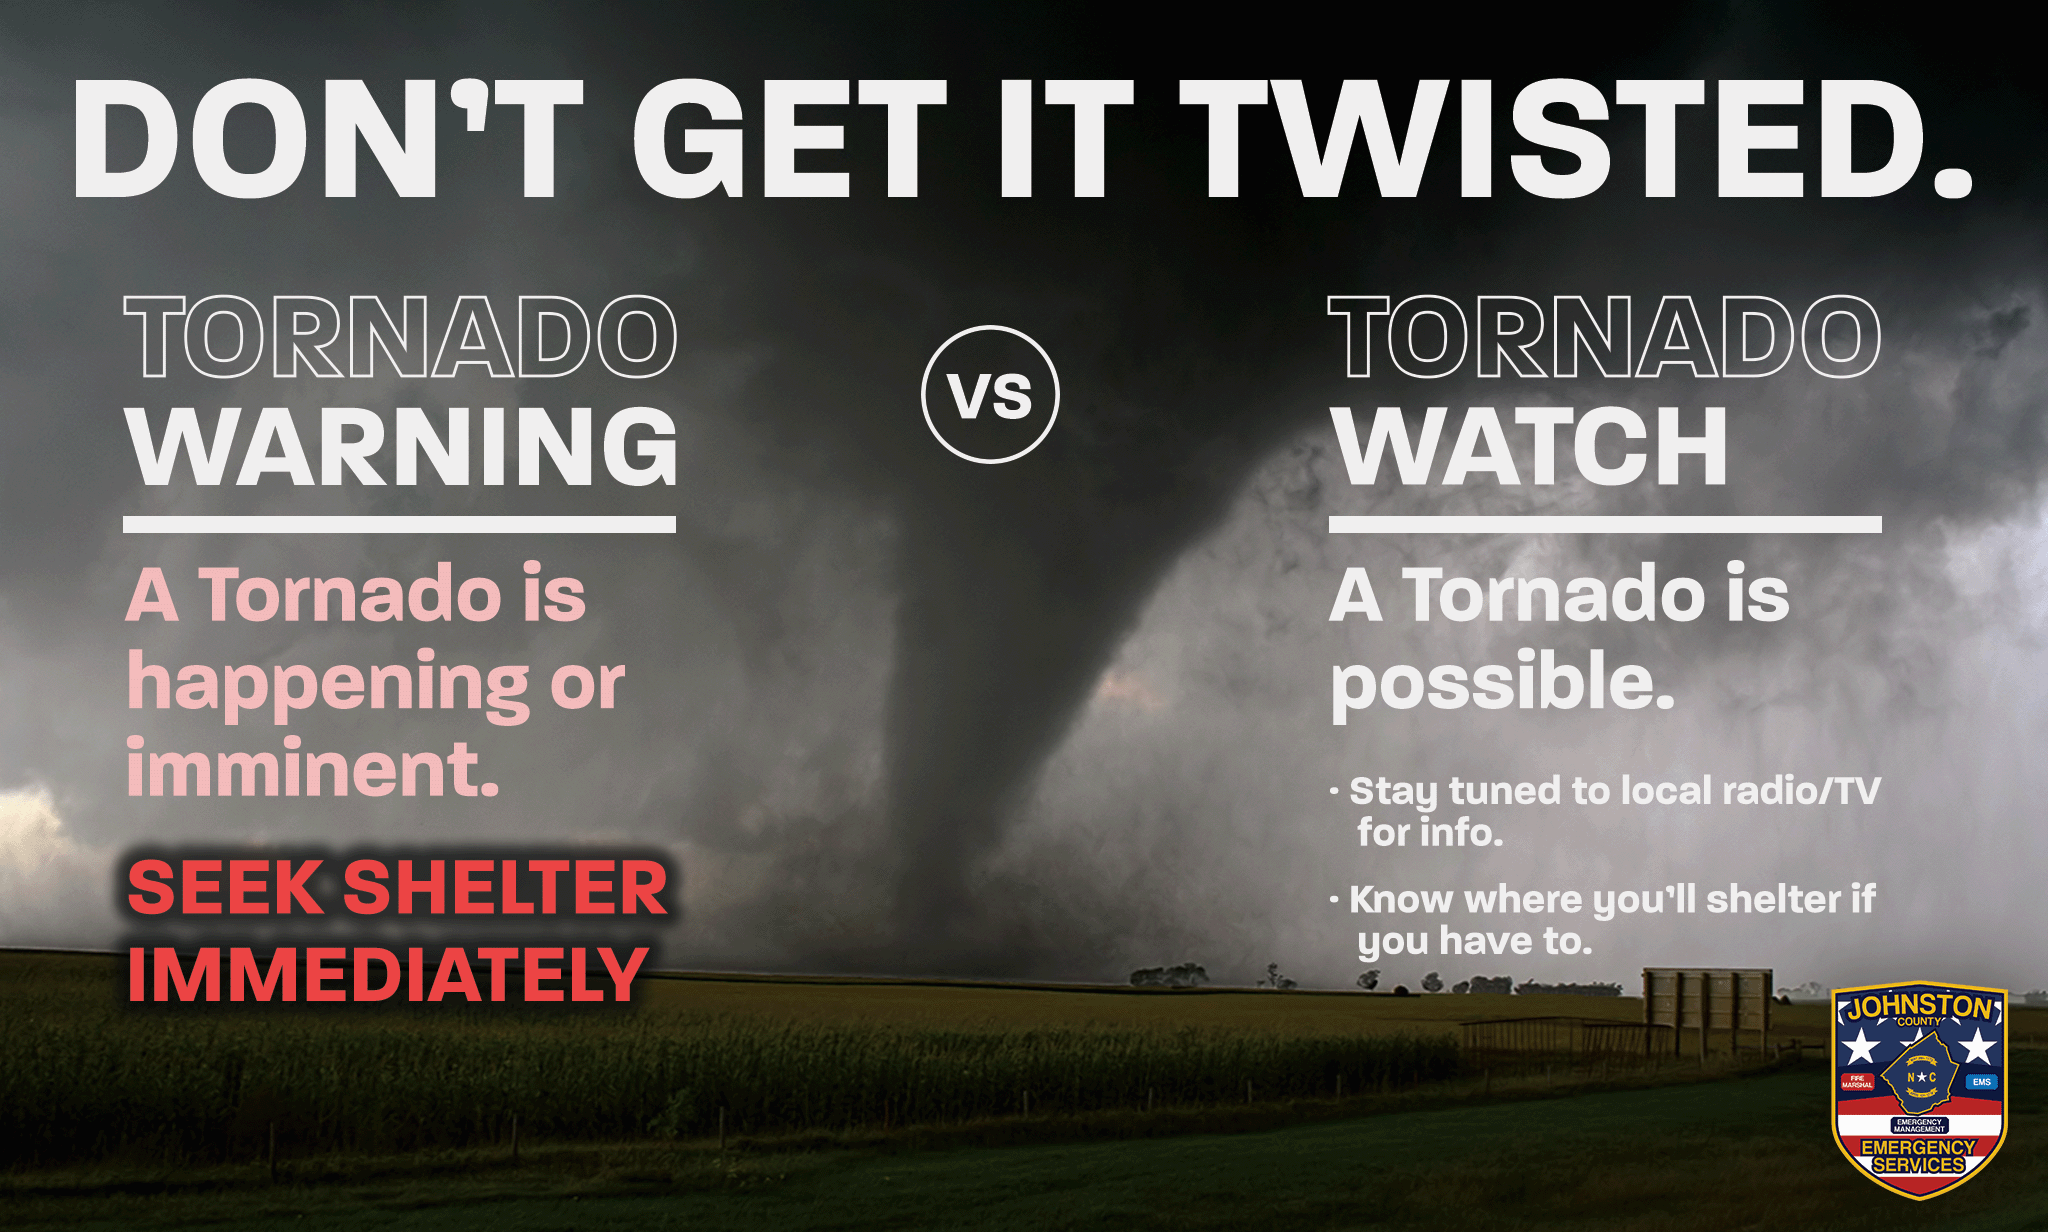 Tornado Warnings vs. Watches Infographic